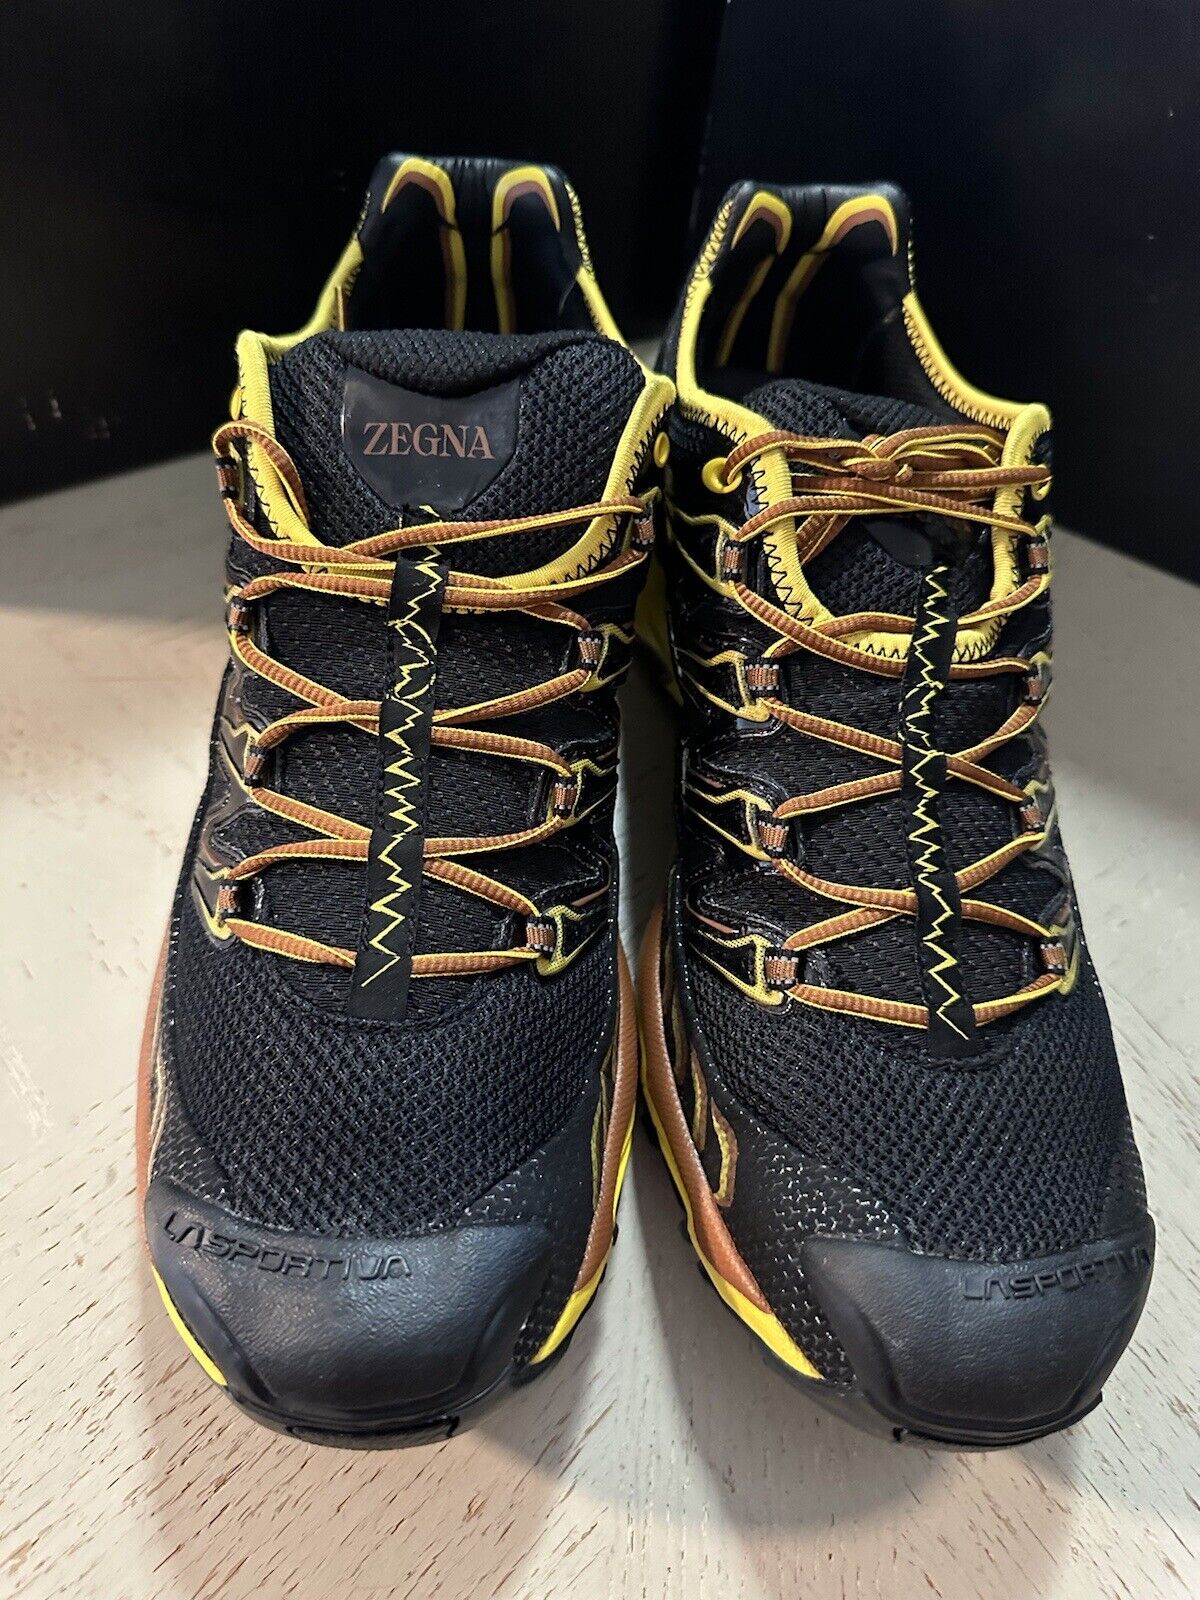 New Zegna Men Sneakers Shoes Black/Yellow/Brown 8.5 US